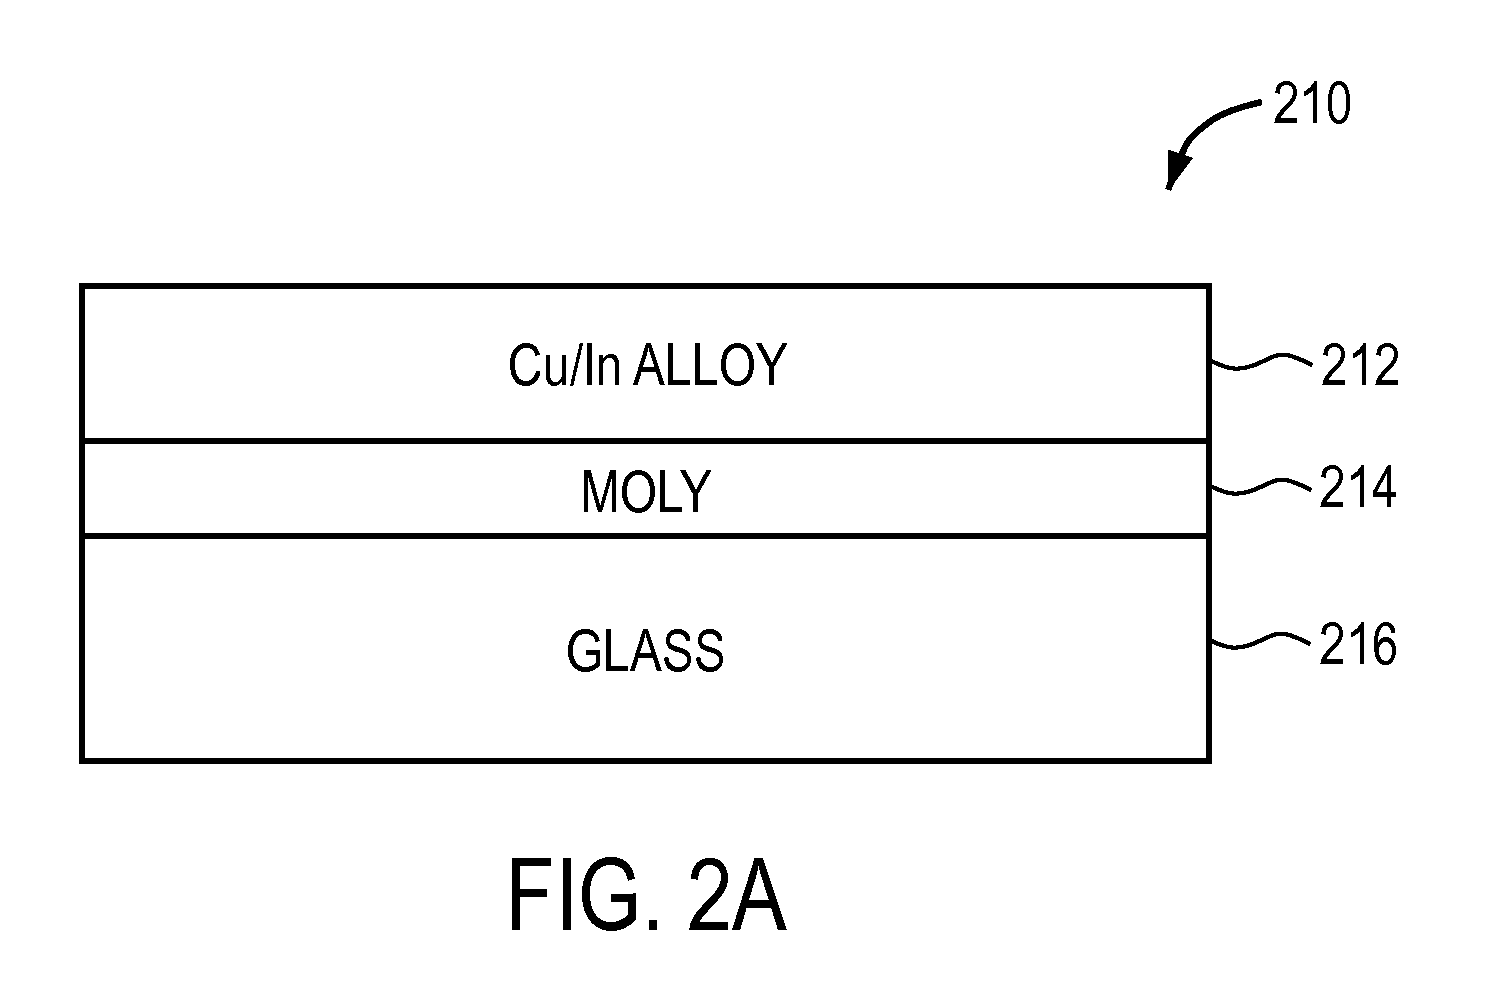 System and method for transferring substrates in large scale processing of cigs and/or cis devices